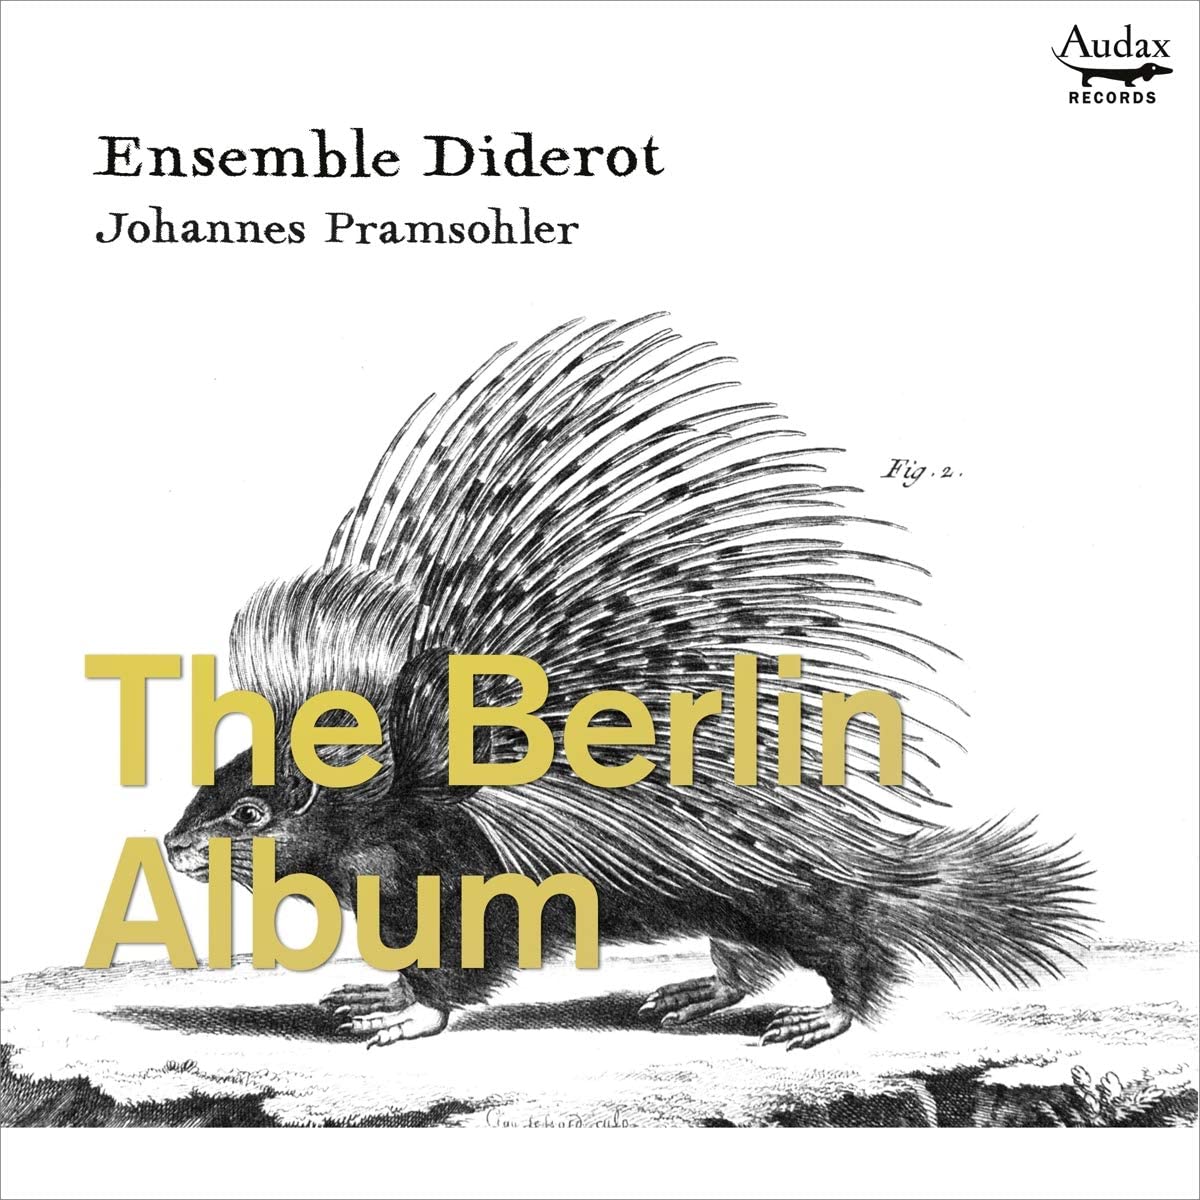 Ensemble Diderot play music from mid-18th-century Germany